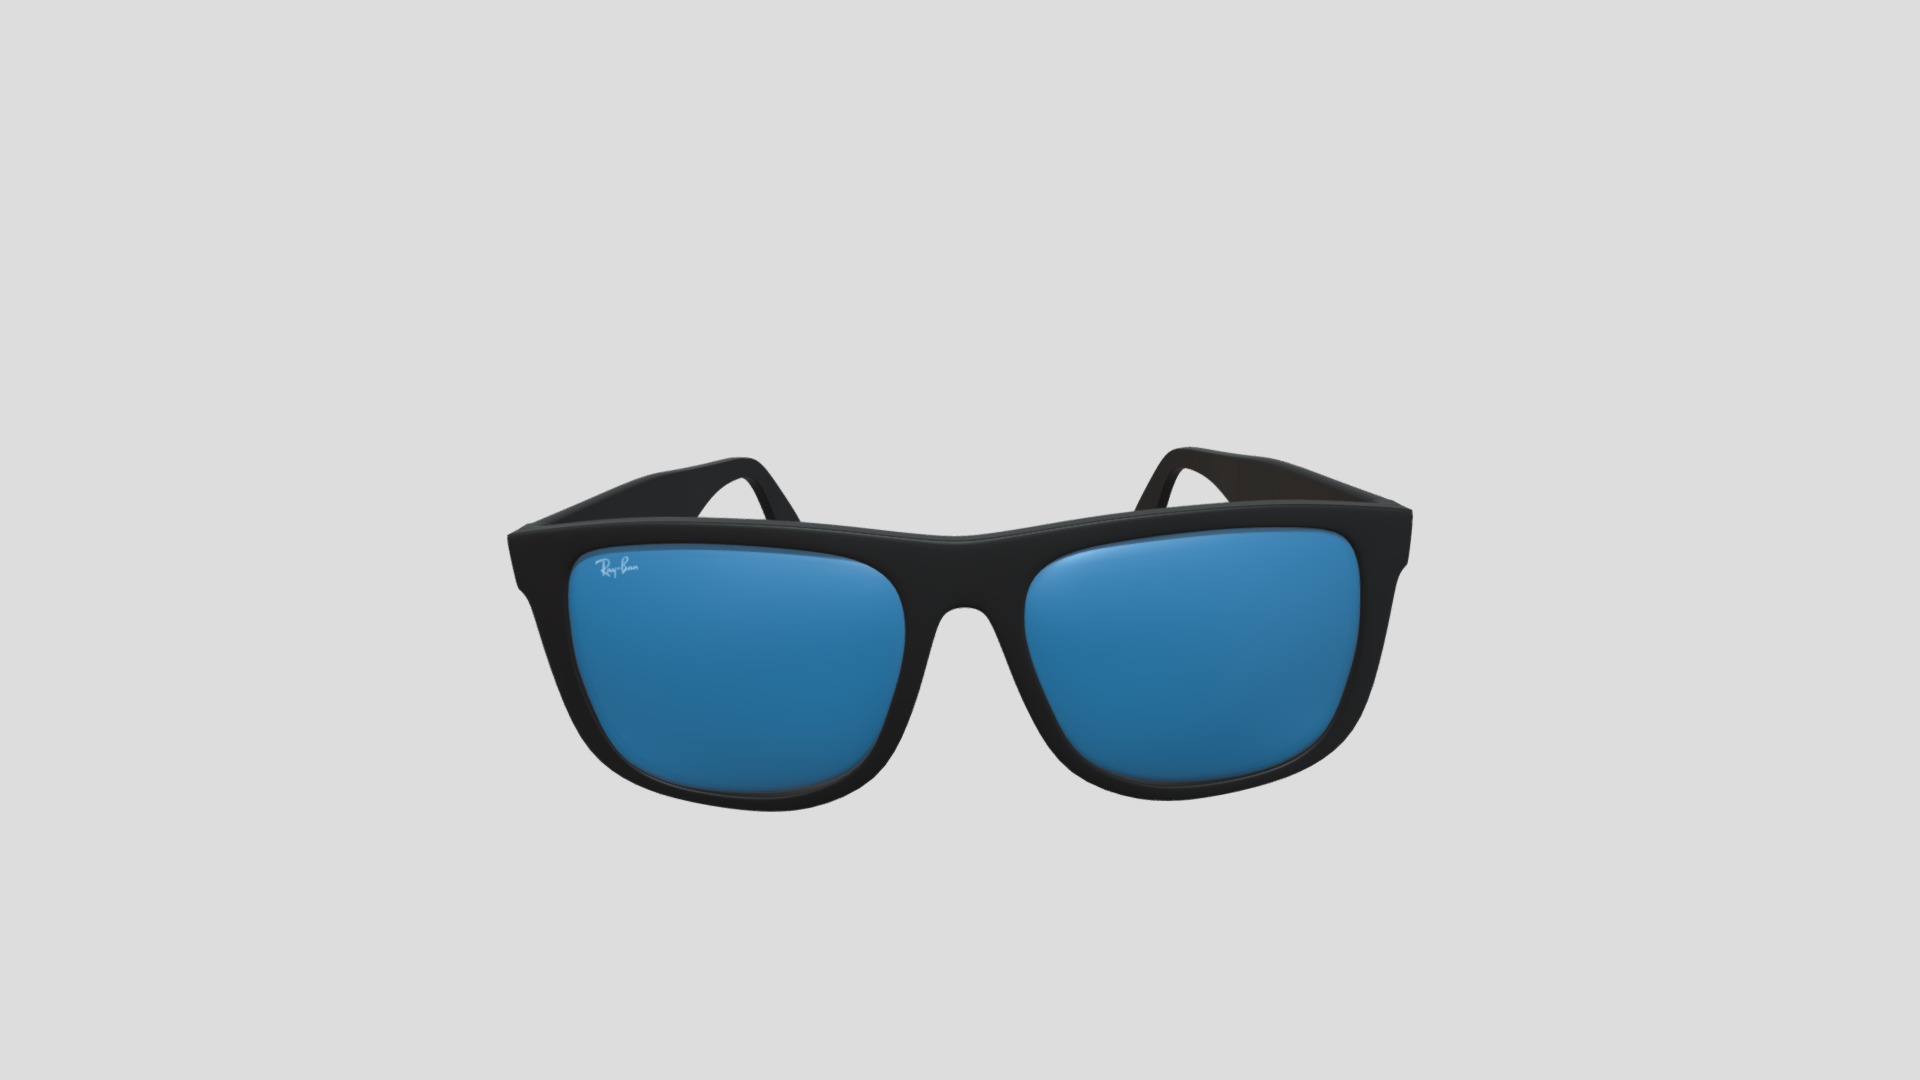 3D model Fashion RayBan Sunglasses with Blue Mirror - This is a 3D model of the Fashion RayBan Sunglasses with Blue Mirror. The 3D model is about a pair of sunglasses.